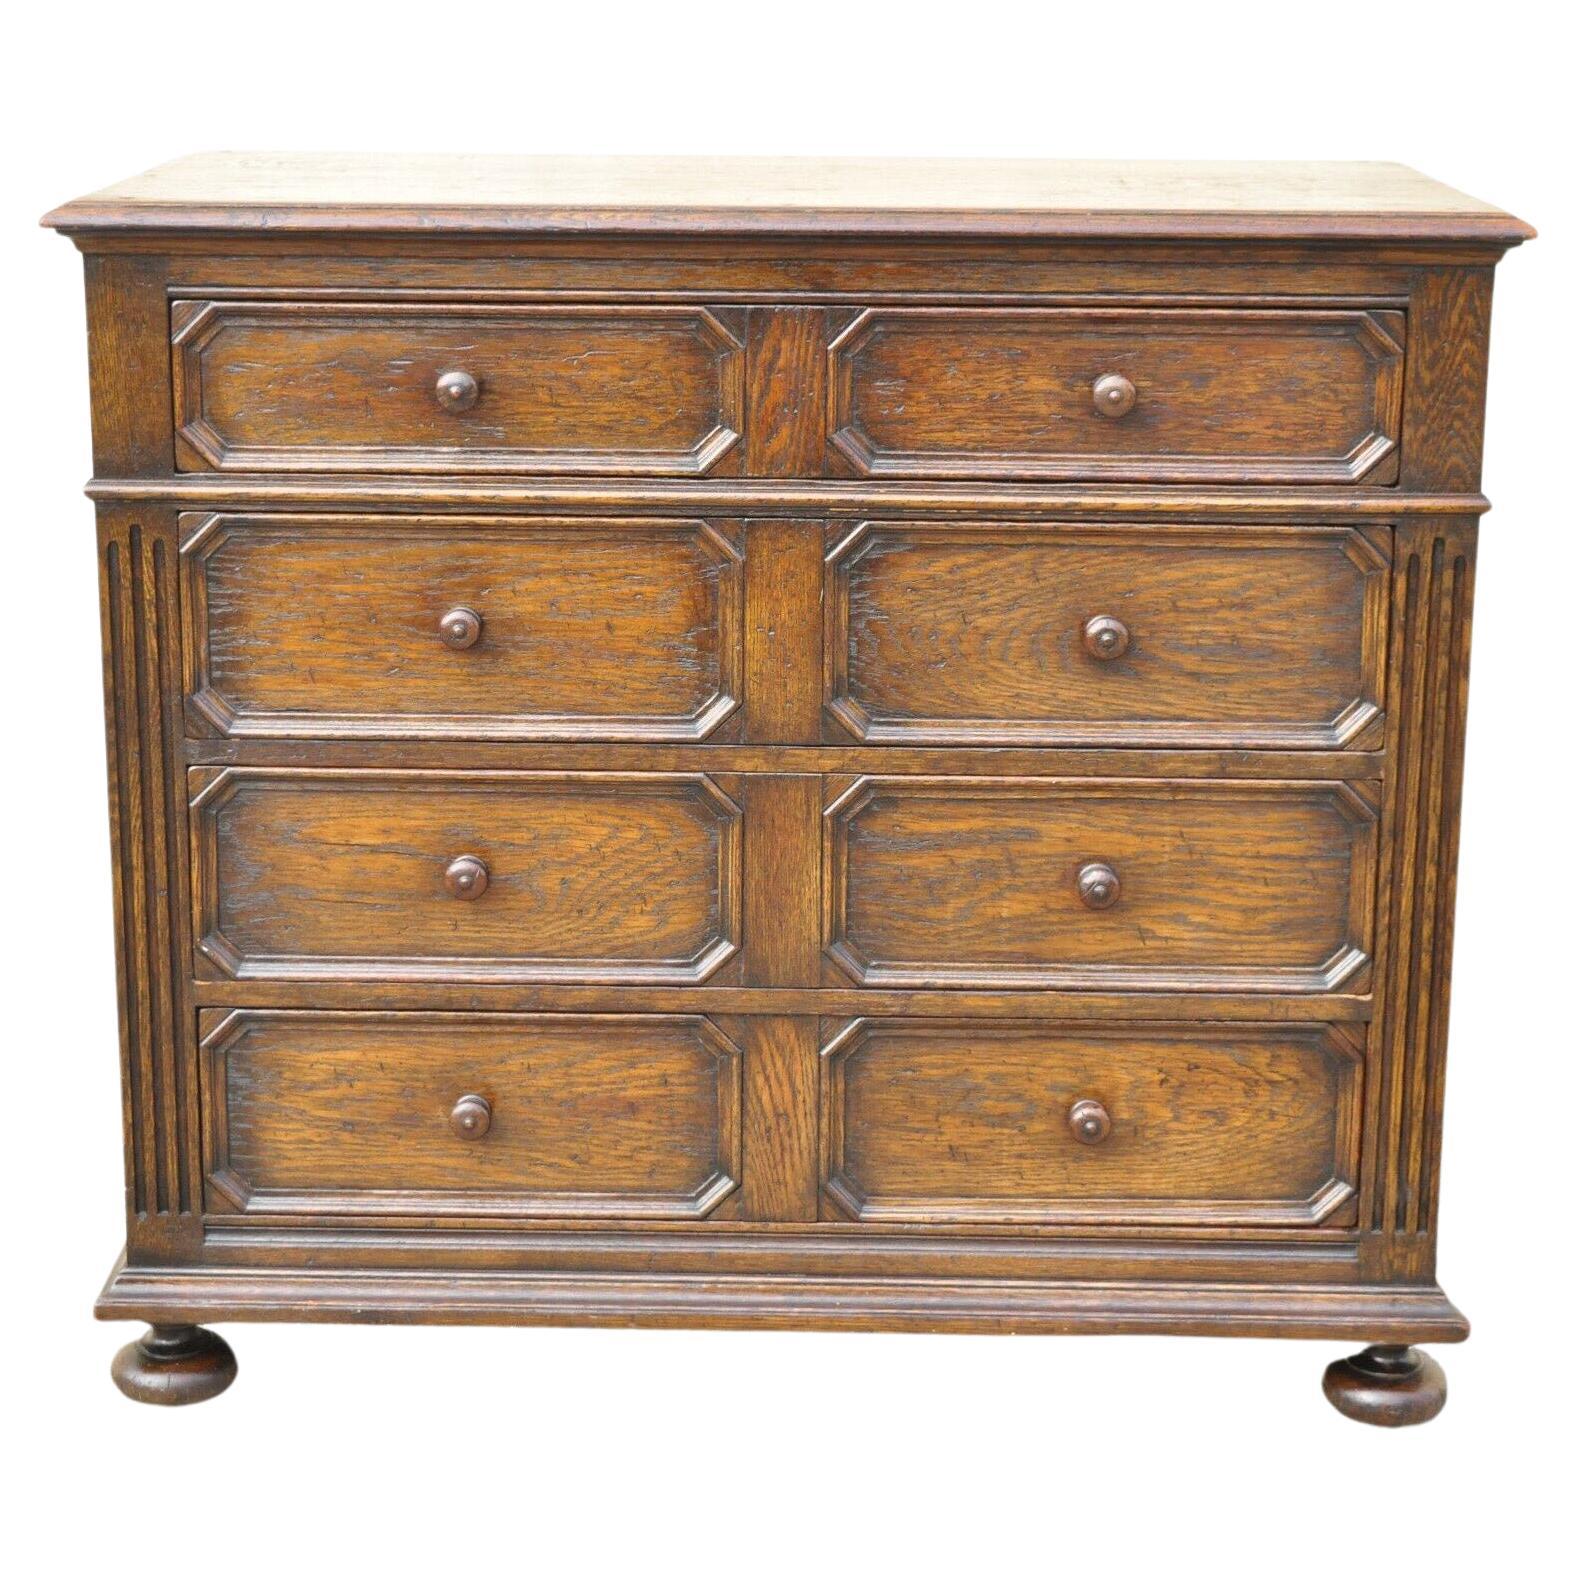 Antique Oak Jacobean Style Carved Wood Chest of Drawers Low Chest Dresser For Sale